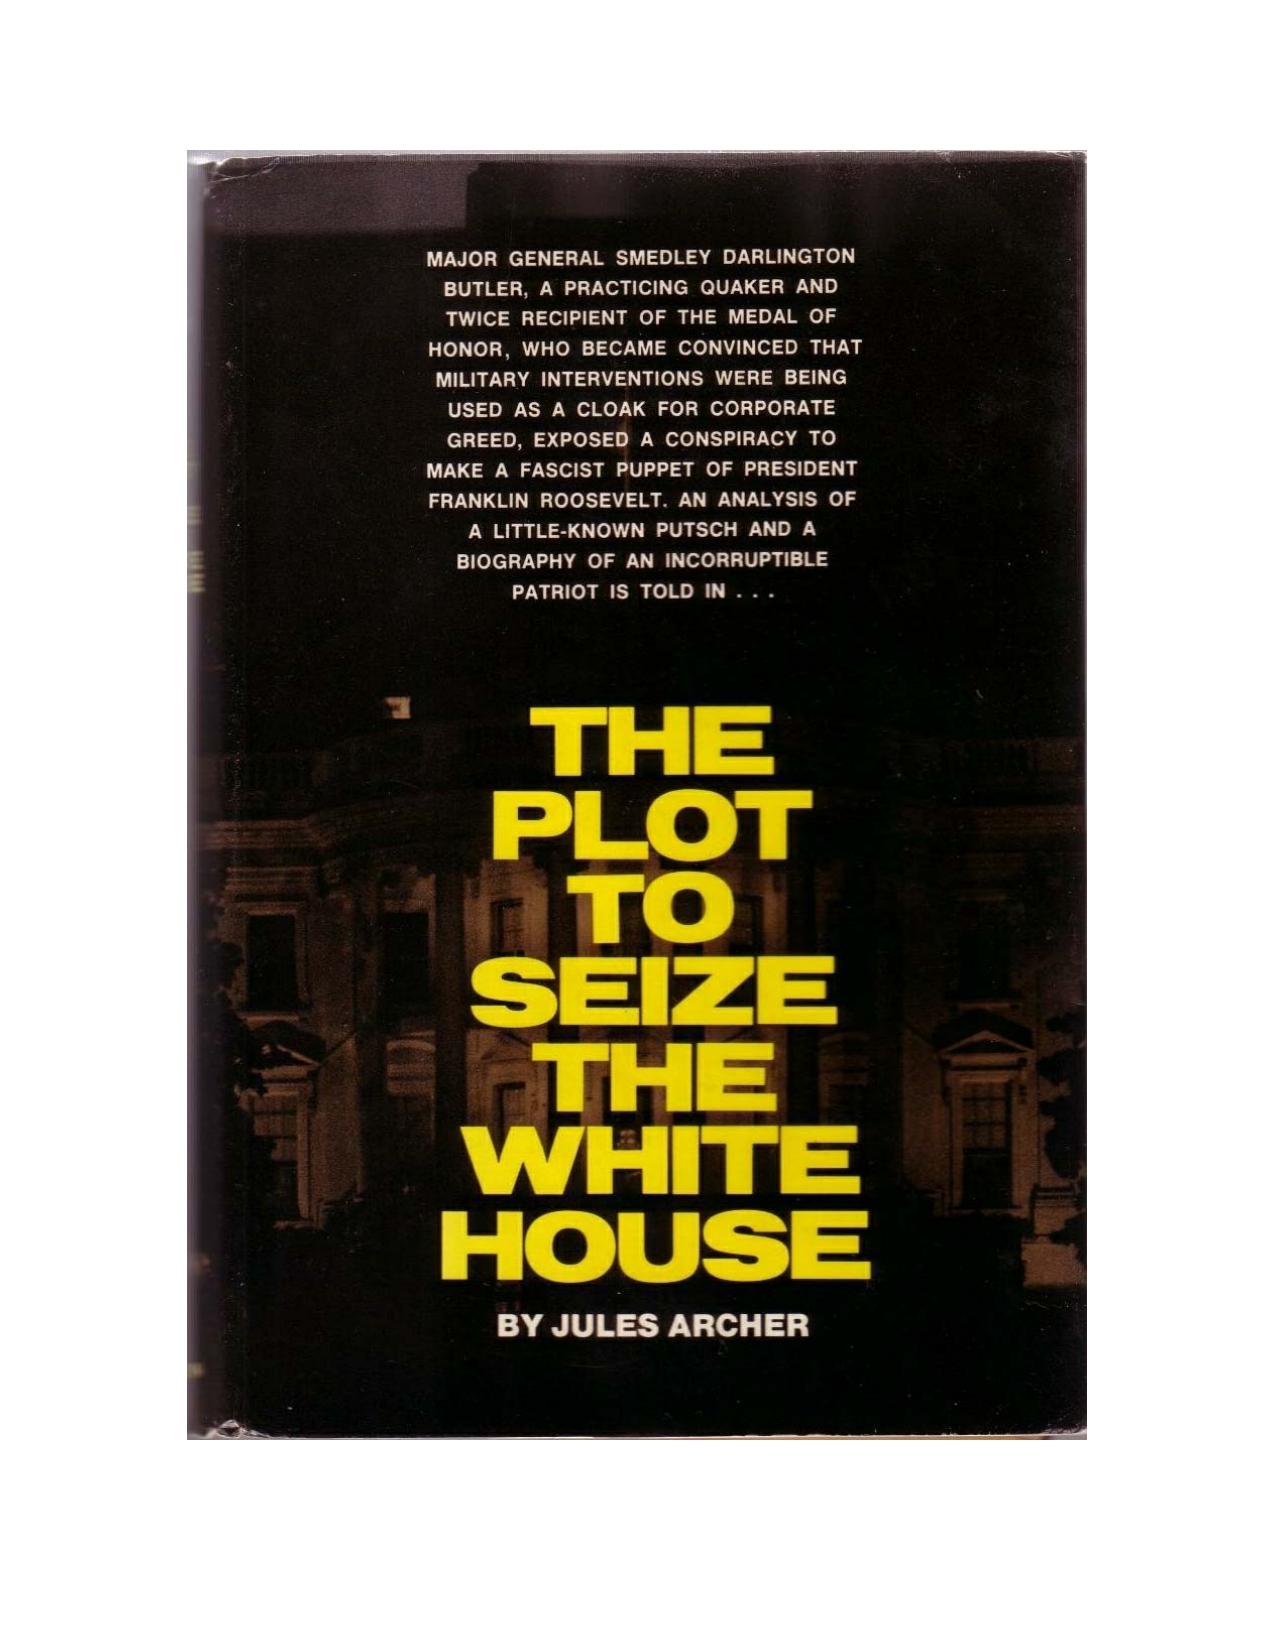 The Plot To Seize The White House (2015) by Jules Archer